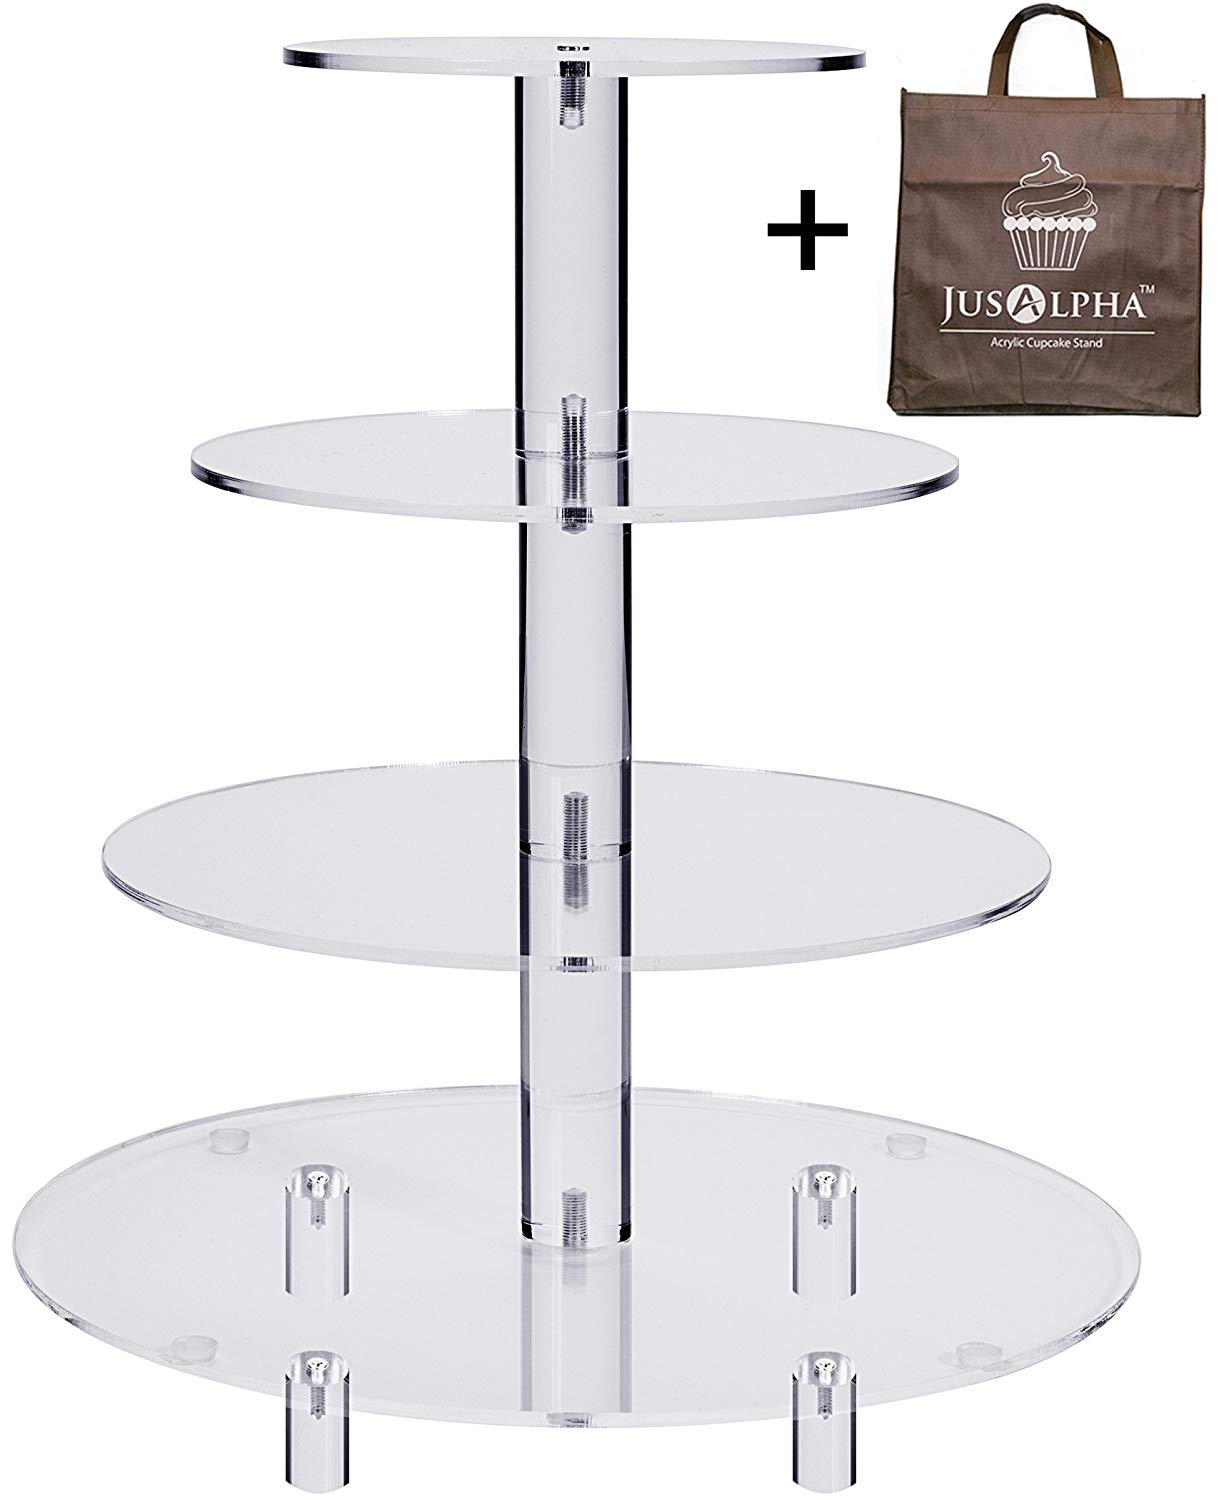 Jusalpha 4-Tier Acrylic Glass Round Cake Stand